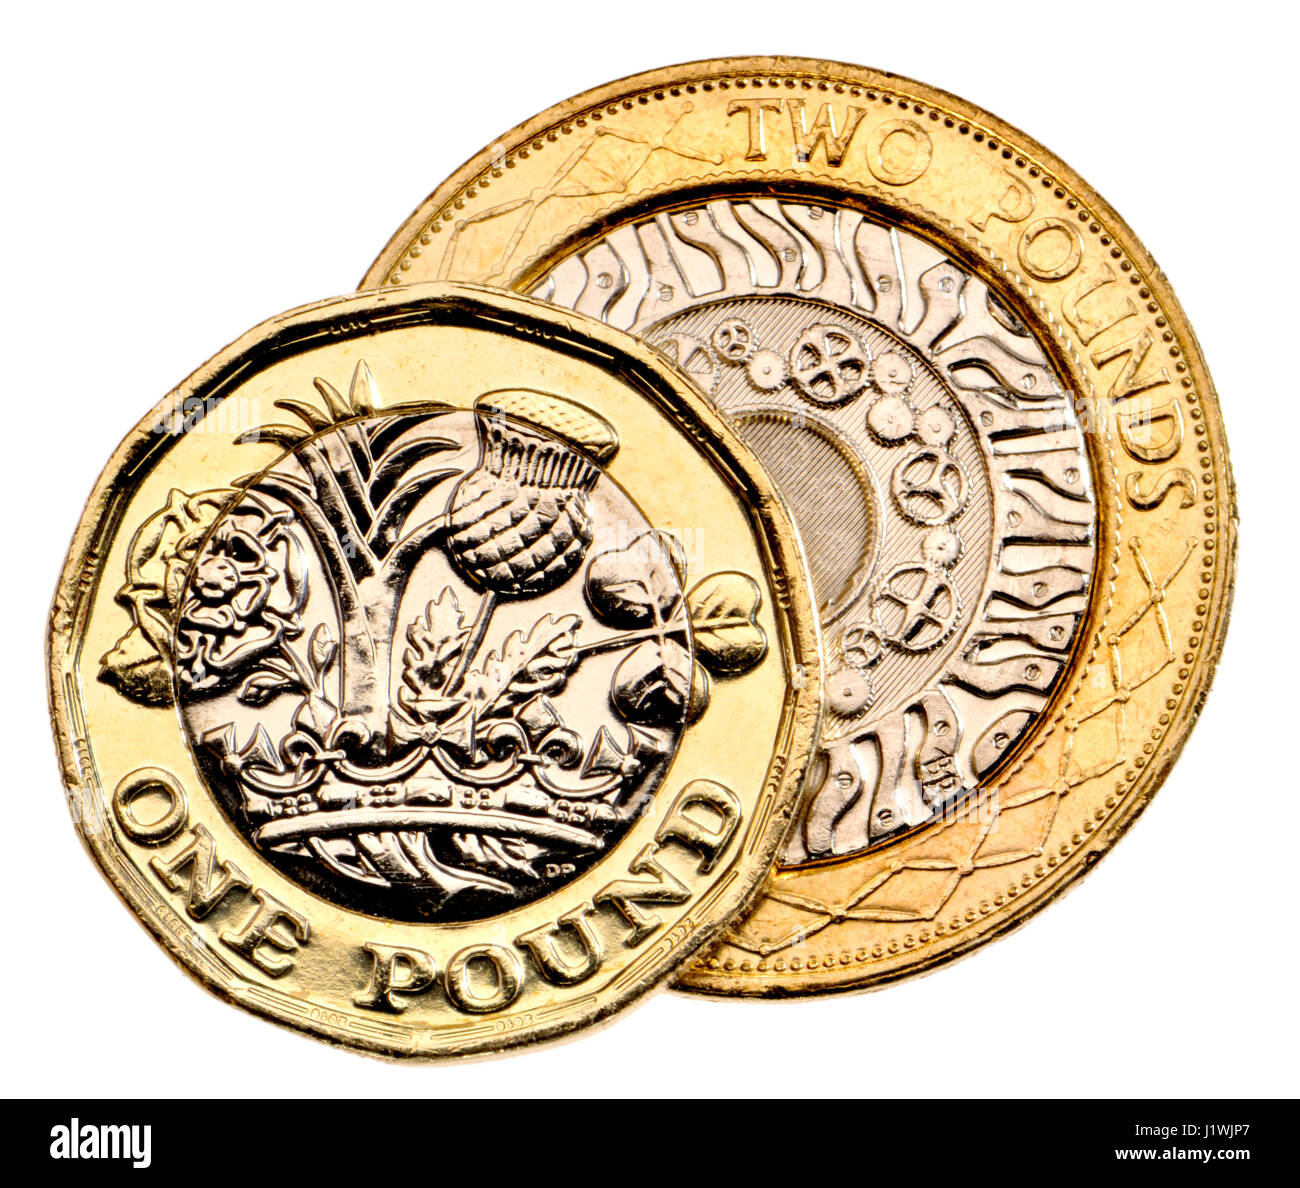 British pound coin - twelve-sided bimetallic 2017 release (dated 2016) and £2 coin Stock Photo